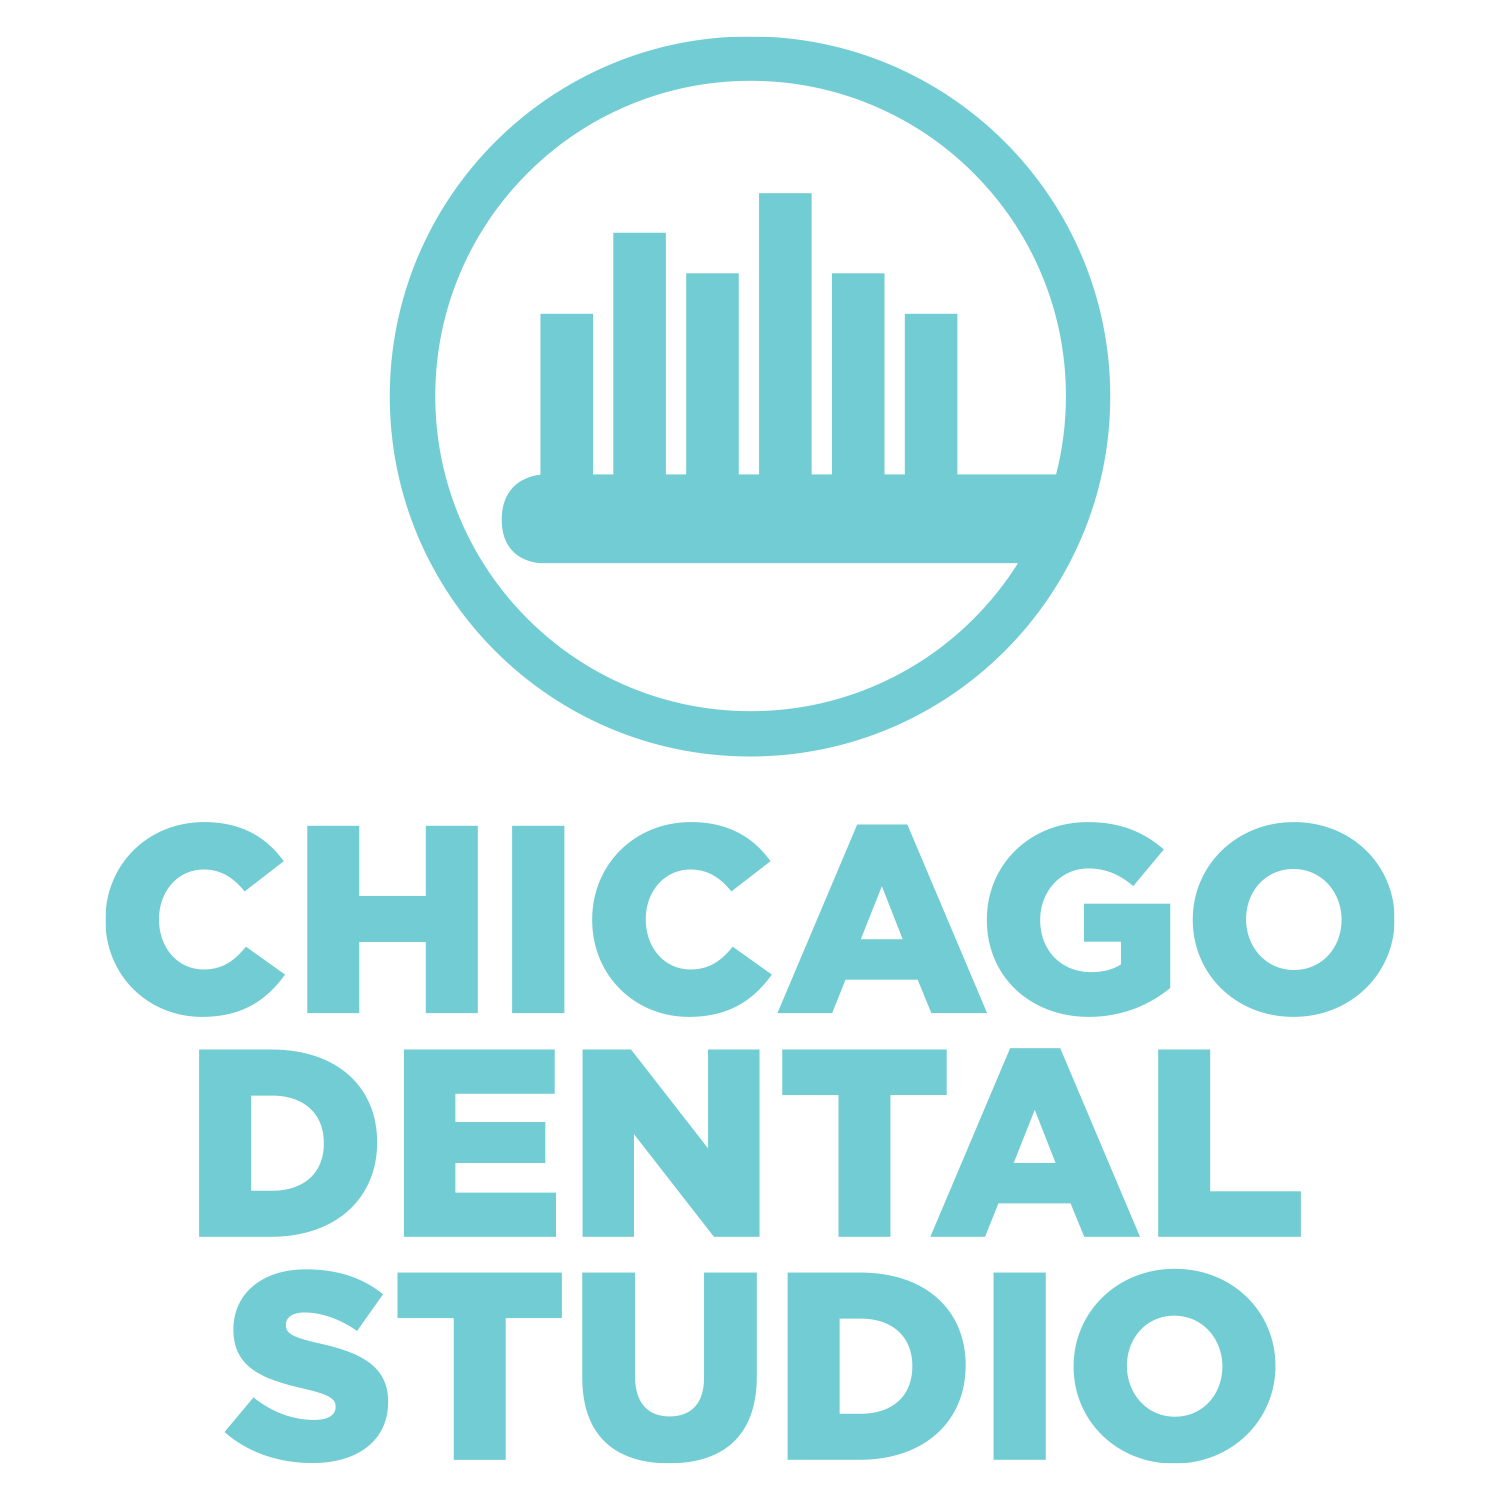 The Chicago Dental Studio, West Loop - Chicago, IL 60661 - (312)414-0696 | ShowMeLocal.com